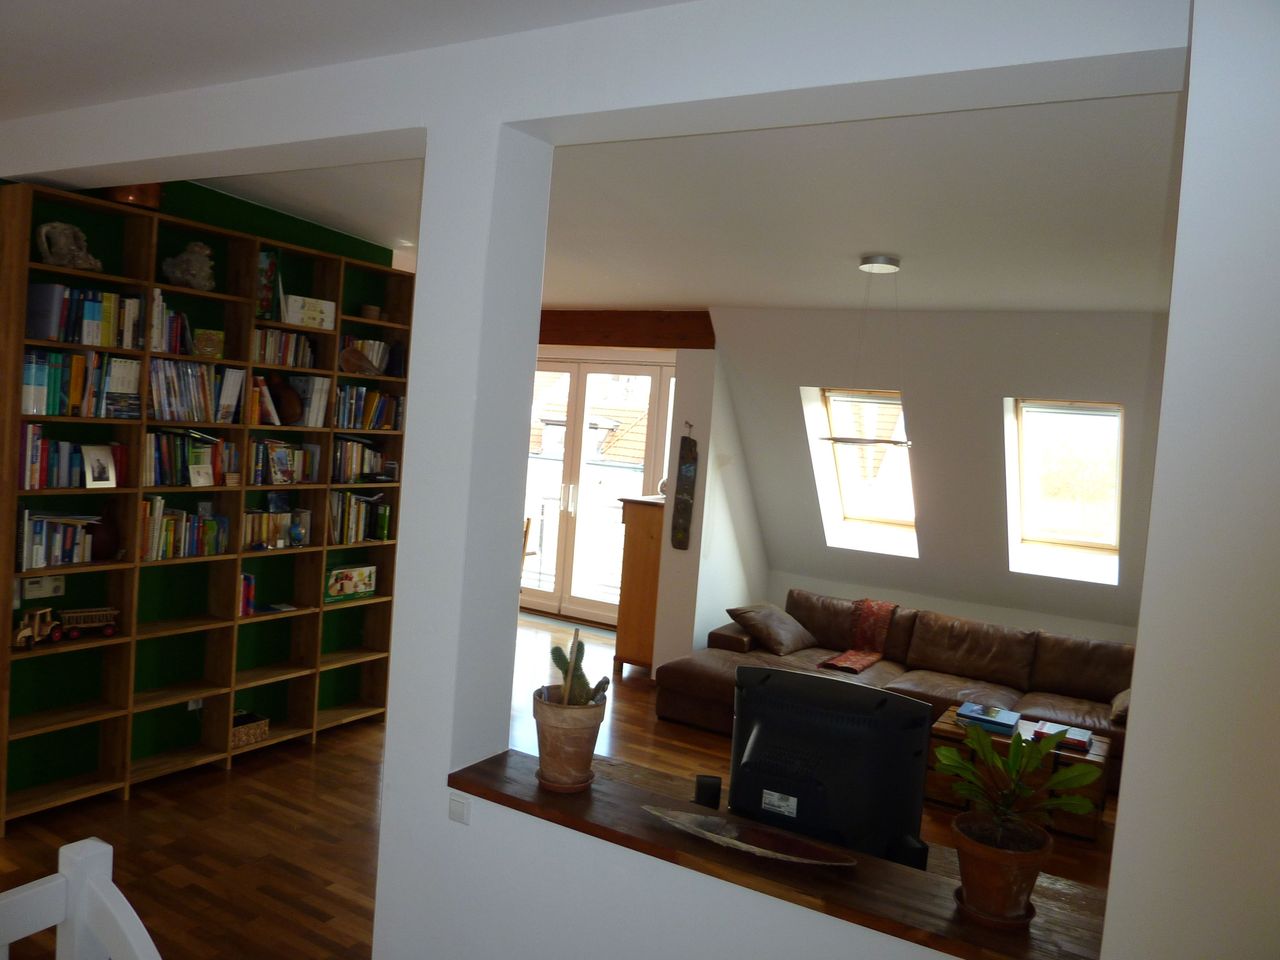 High quality penthouse maisonette apartment in ideal location